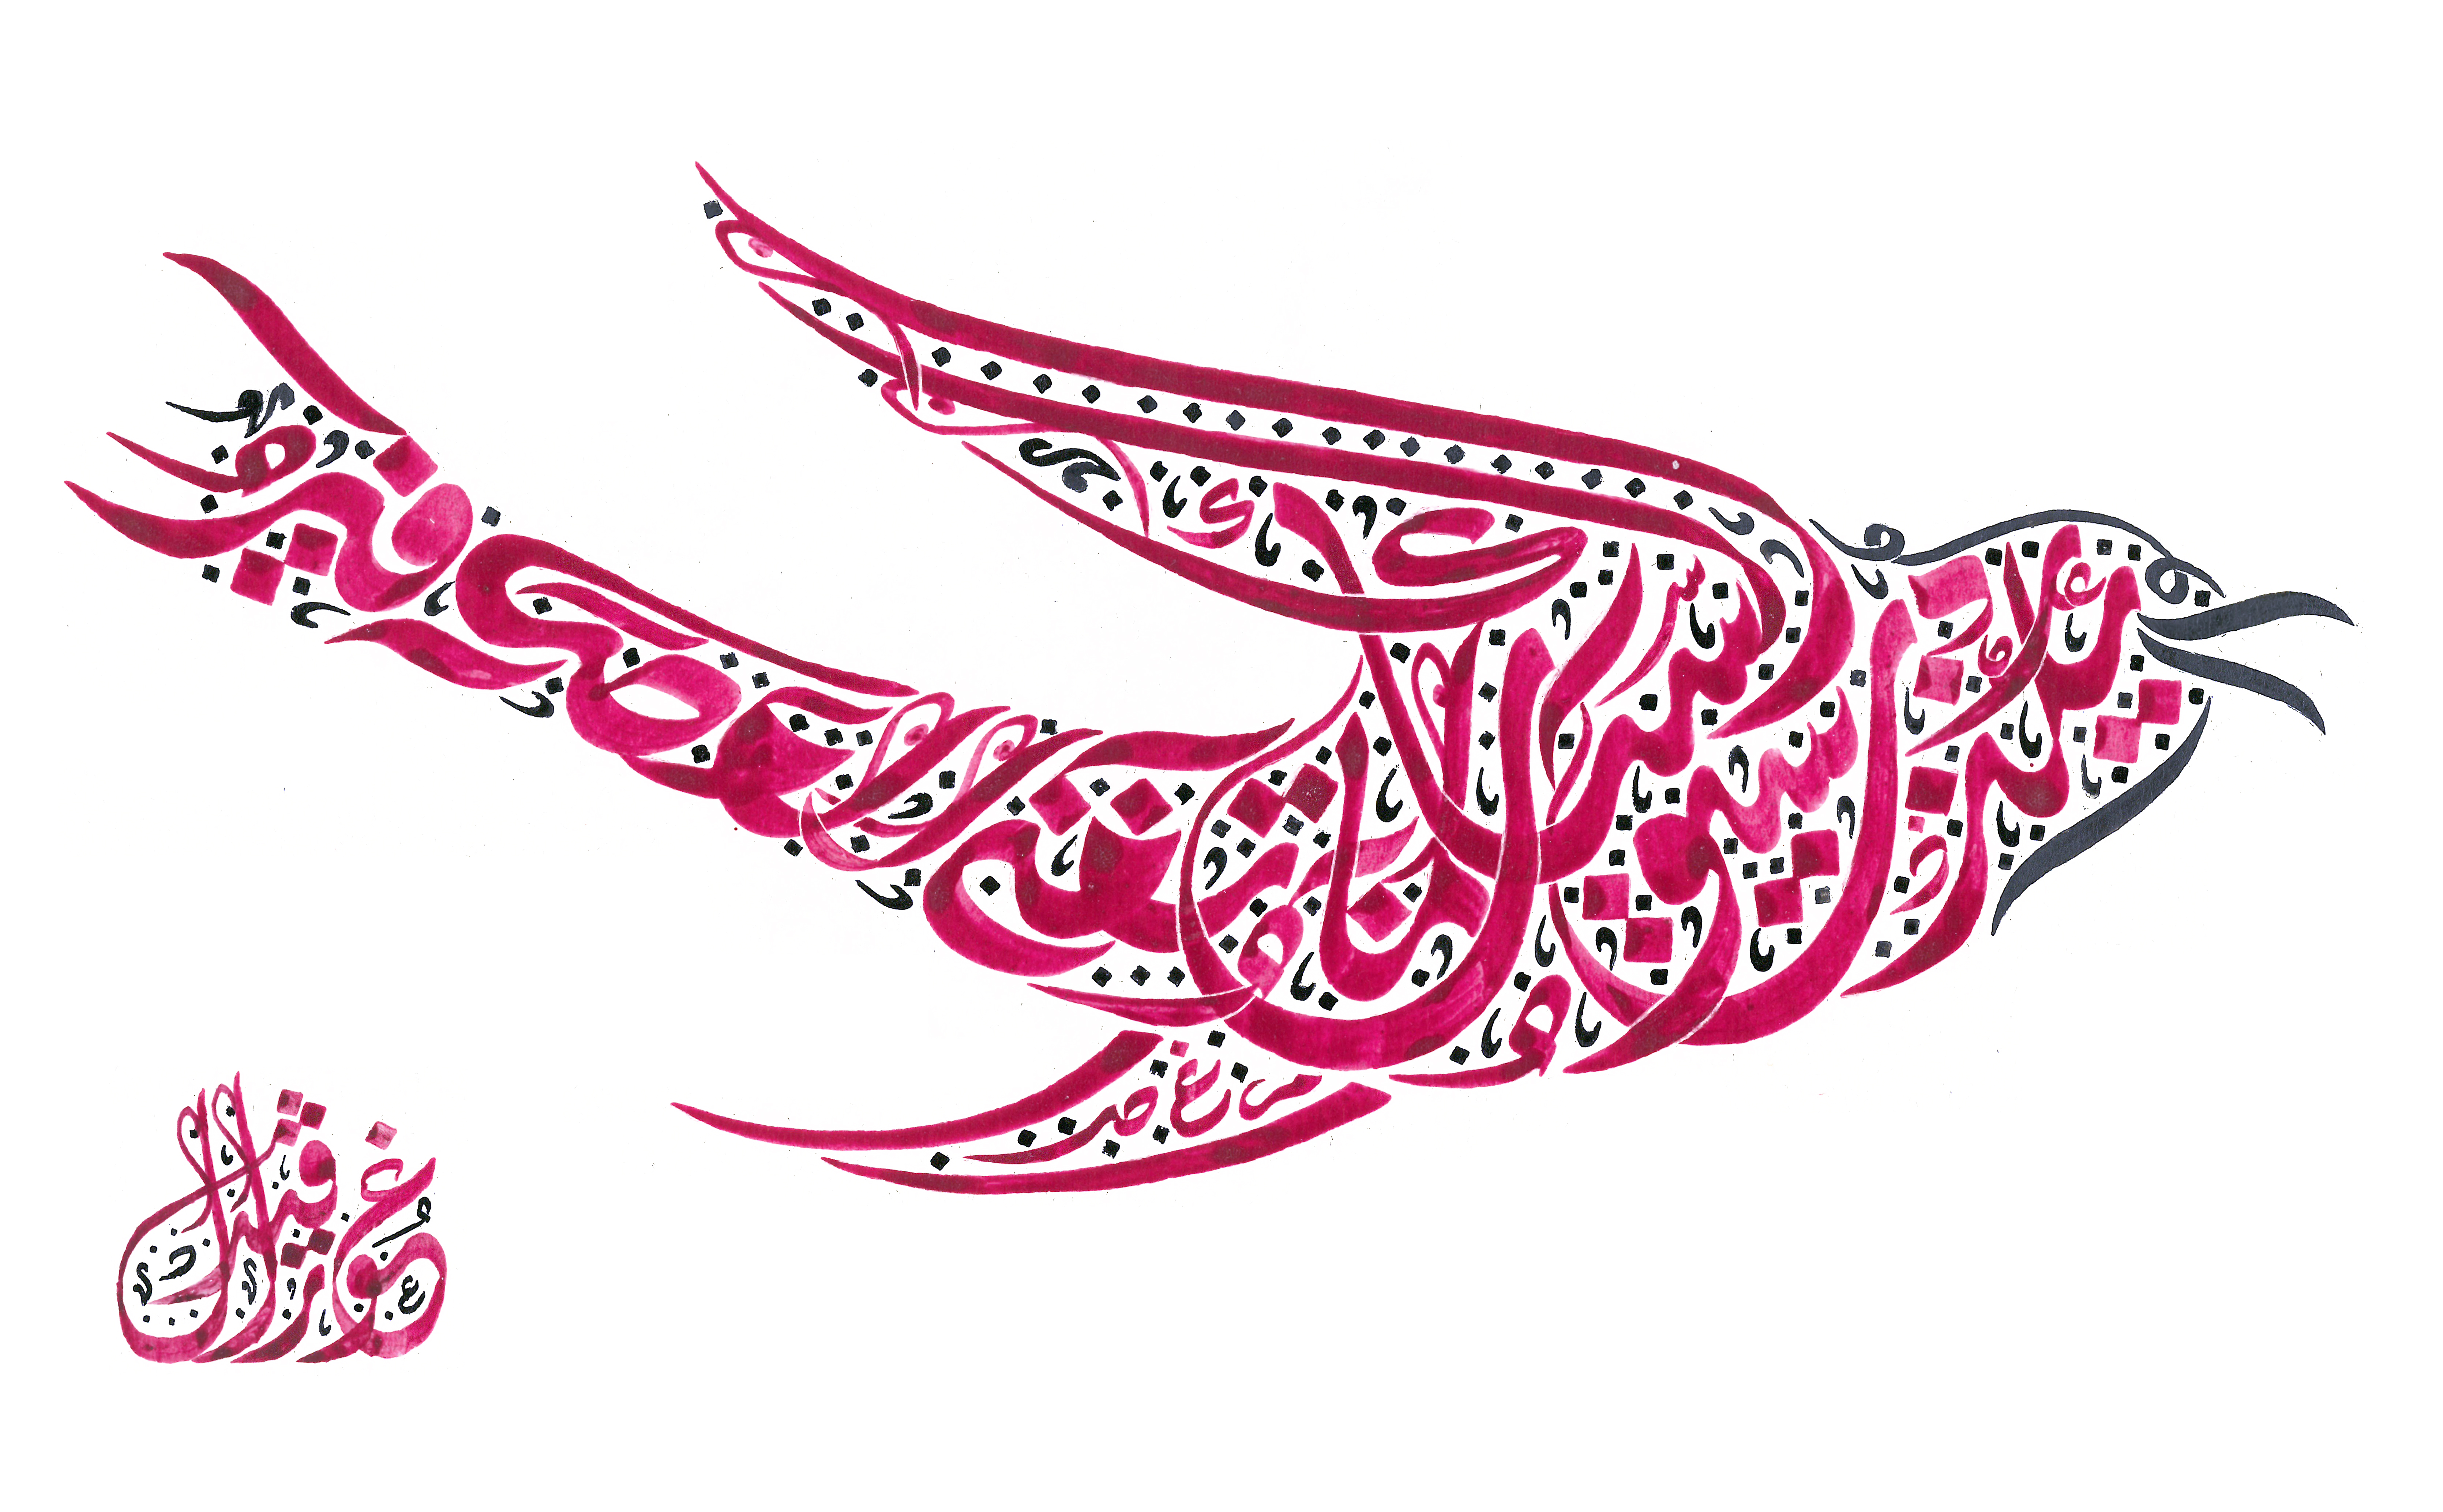 Politician Bird - Arabic Calligraphy by Everitte Barbee